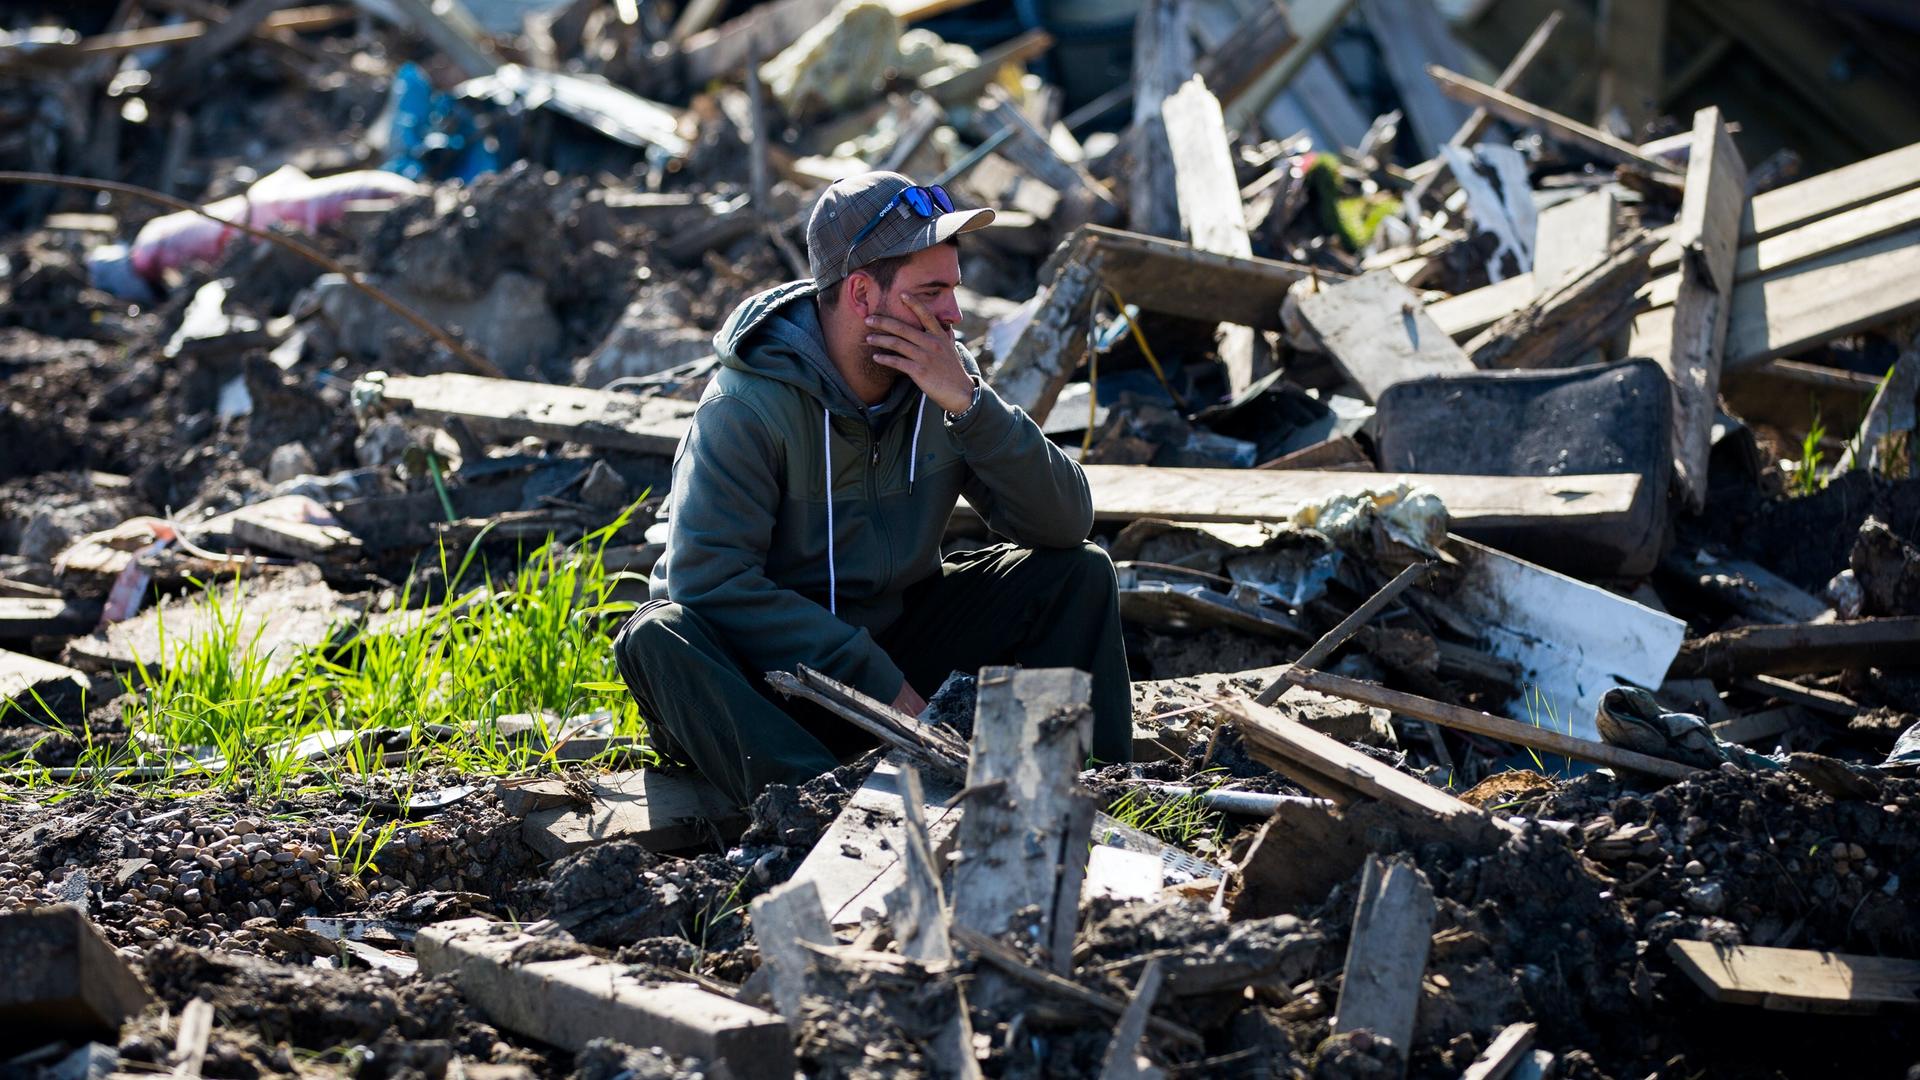 A man squats in rubble holding his head in a perplexed way